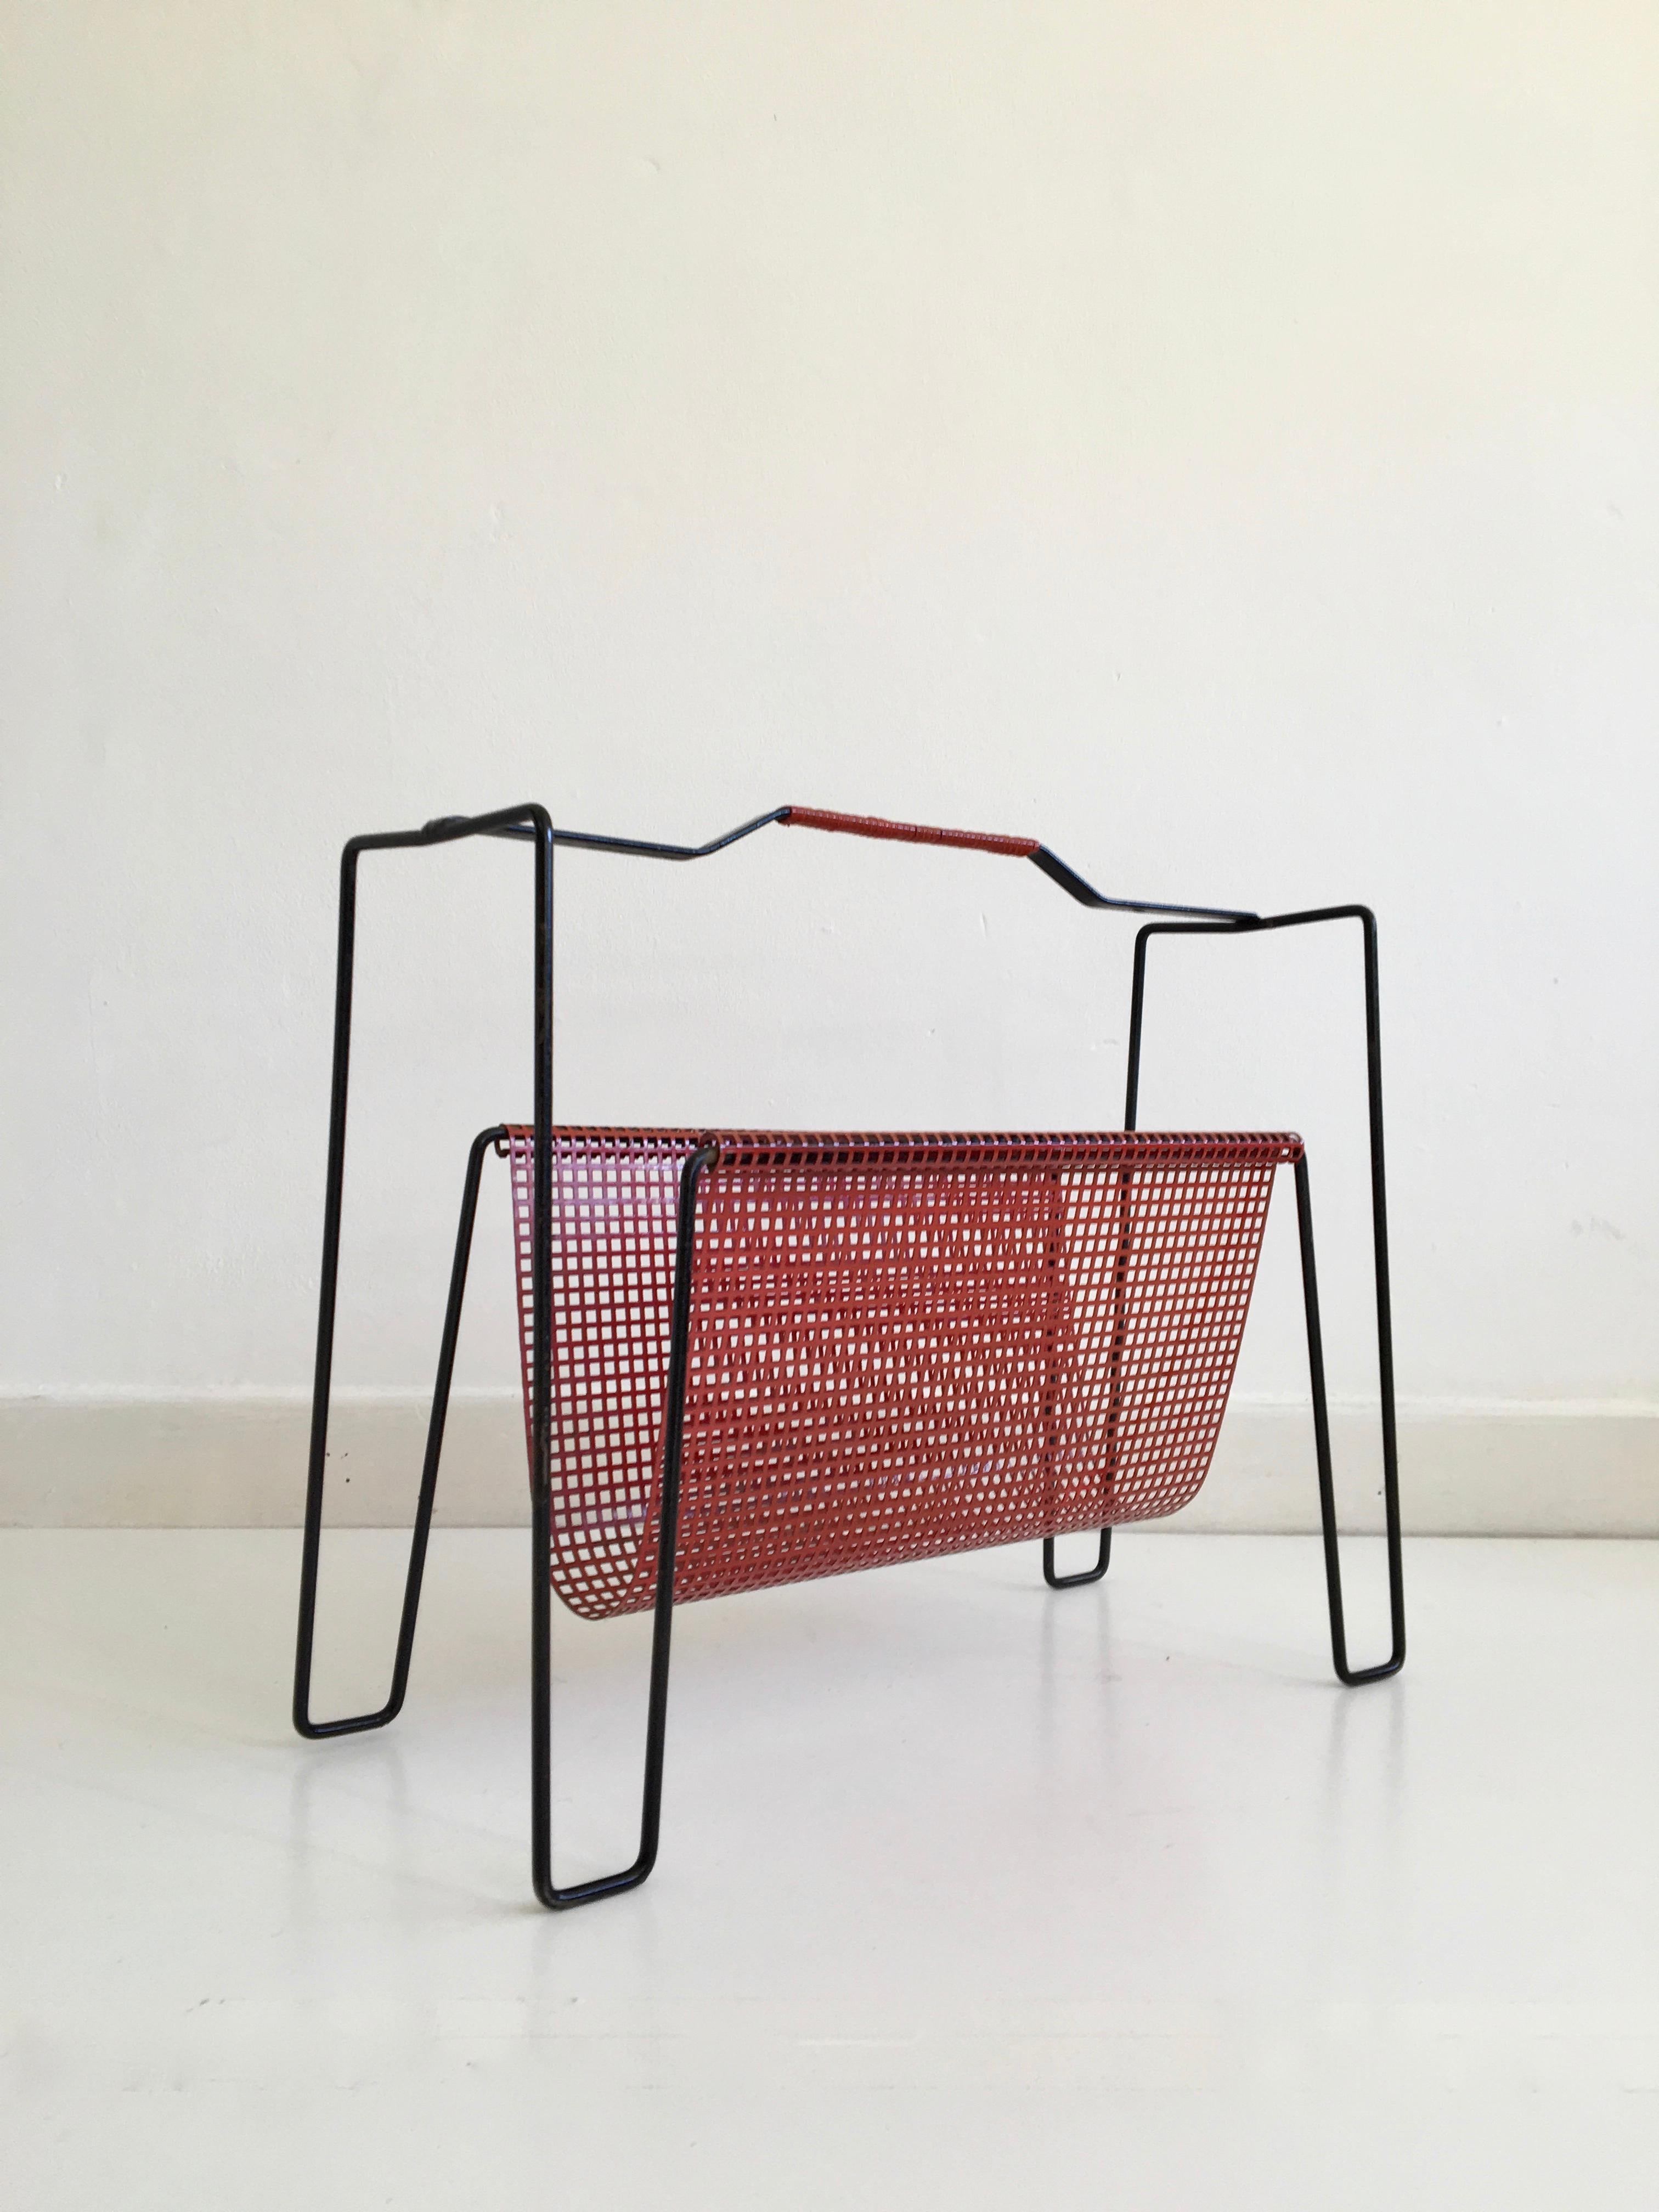 Dutch red and black metal magazine rack designed by Tjerk Reijenga in the 1950s.

Dimensions (cm, approx):
Height 36
Width 45
Depth 19

Good condition for year with minor surface corrosion to the black metal frame.
 